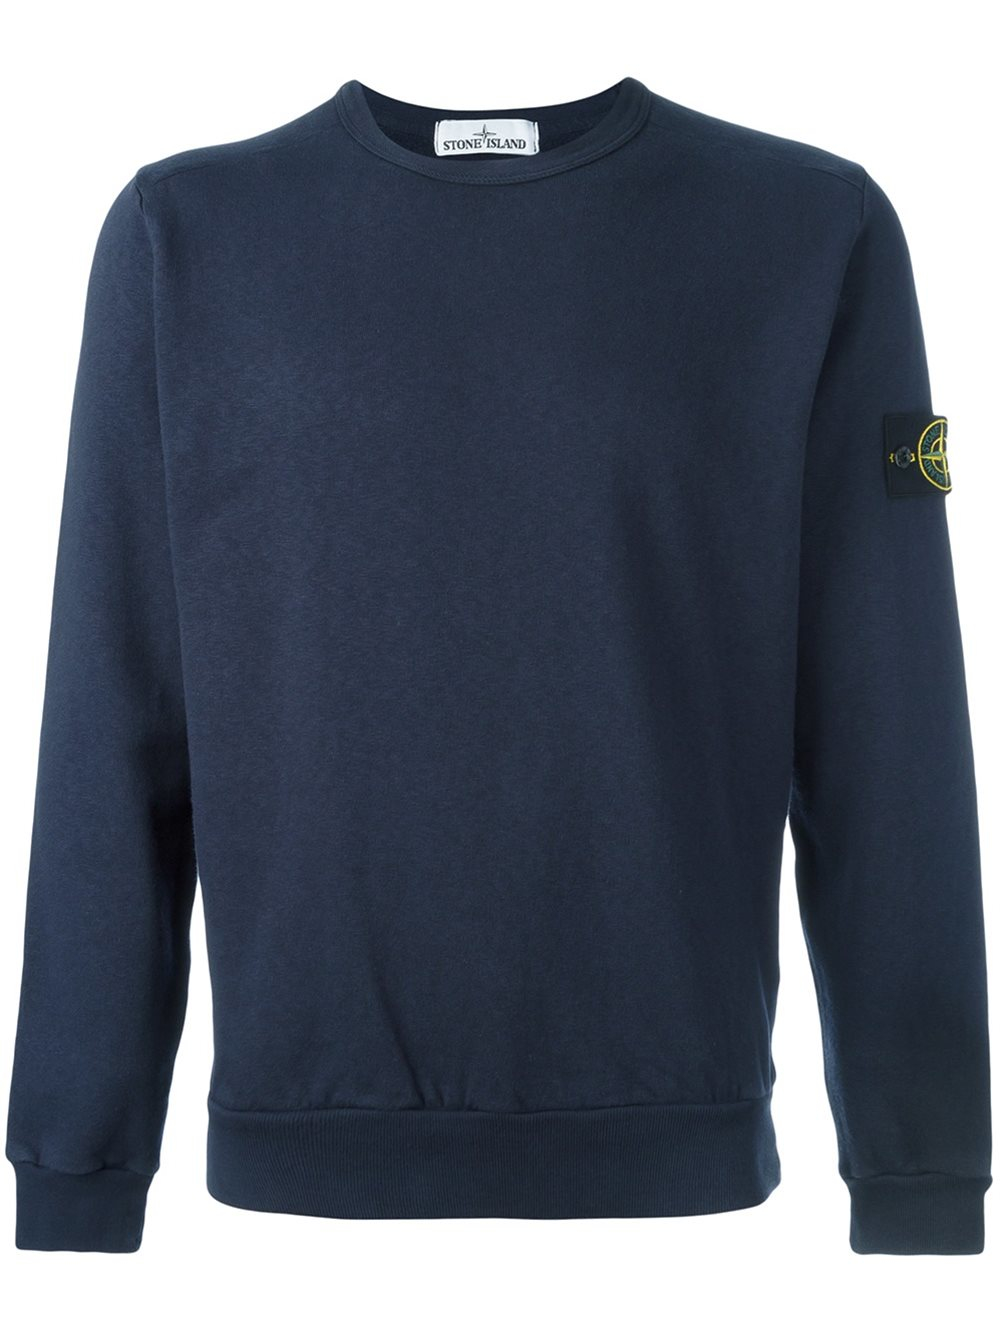 Stone Island Cotton Logo Patch Jumper in Blue for Men - Lyst